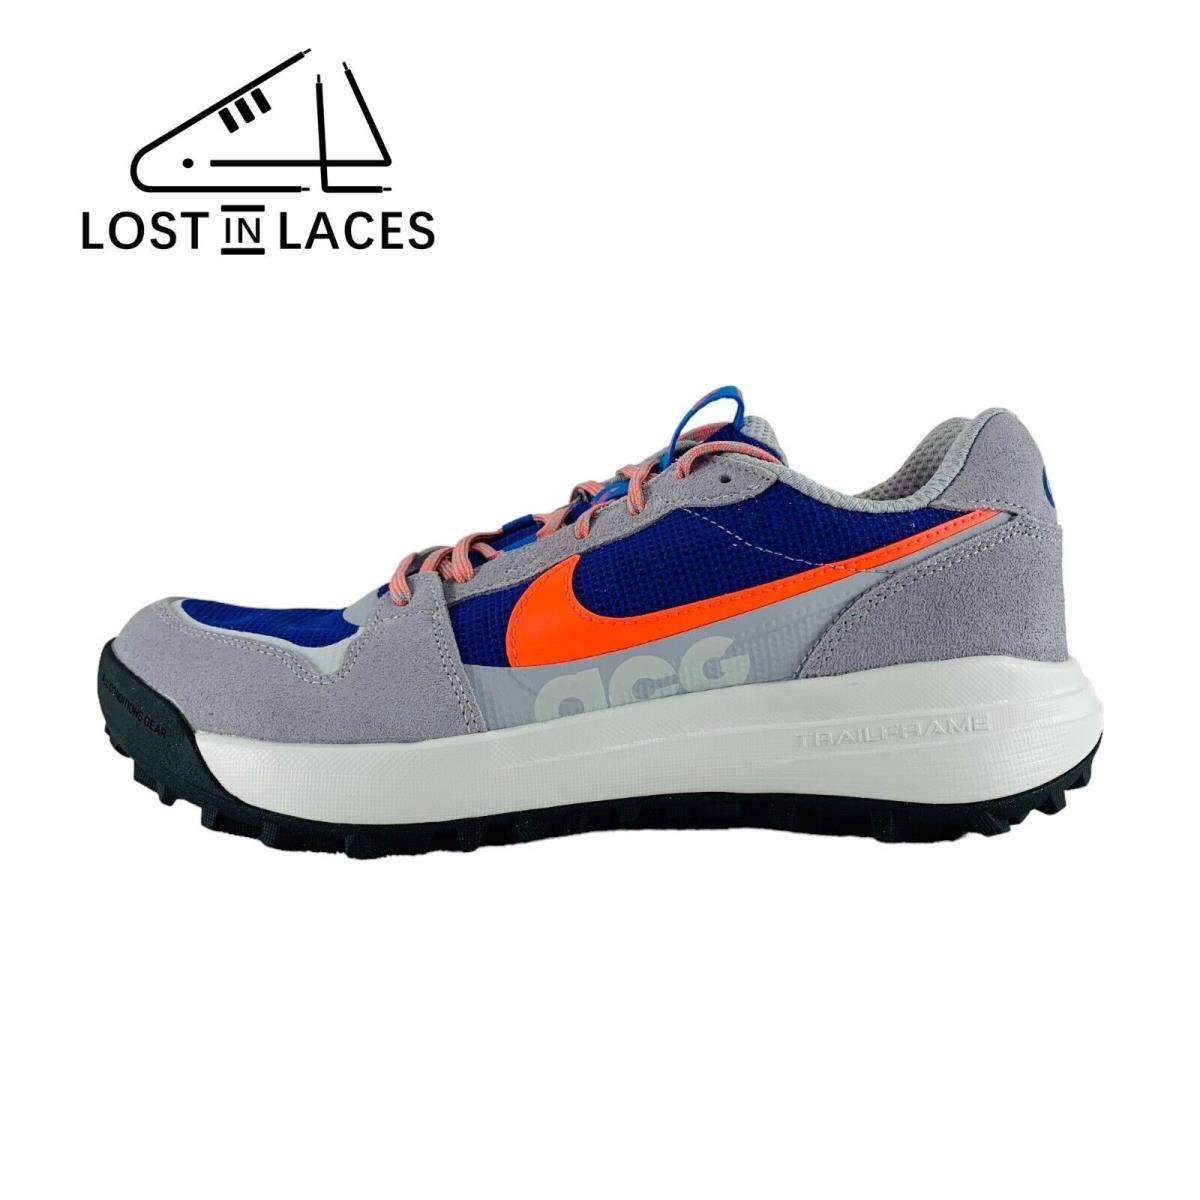 Nike Acg Lowcate Wolf Grey Bright Crimson Trail Running Shoes Men`s Sizes